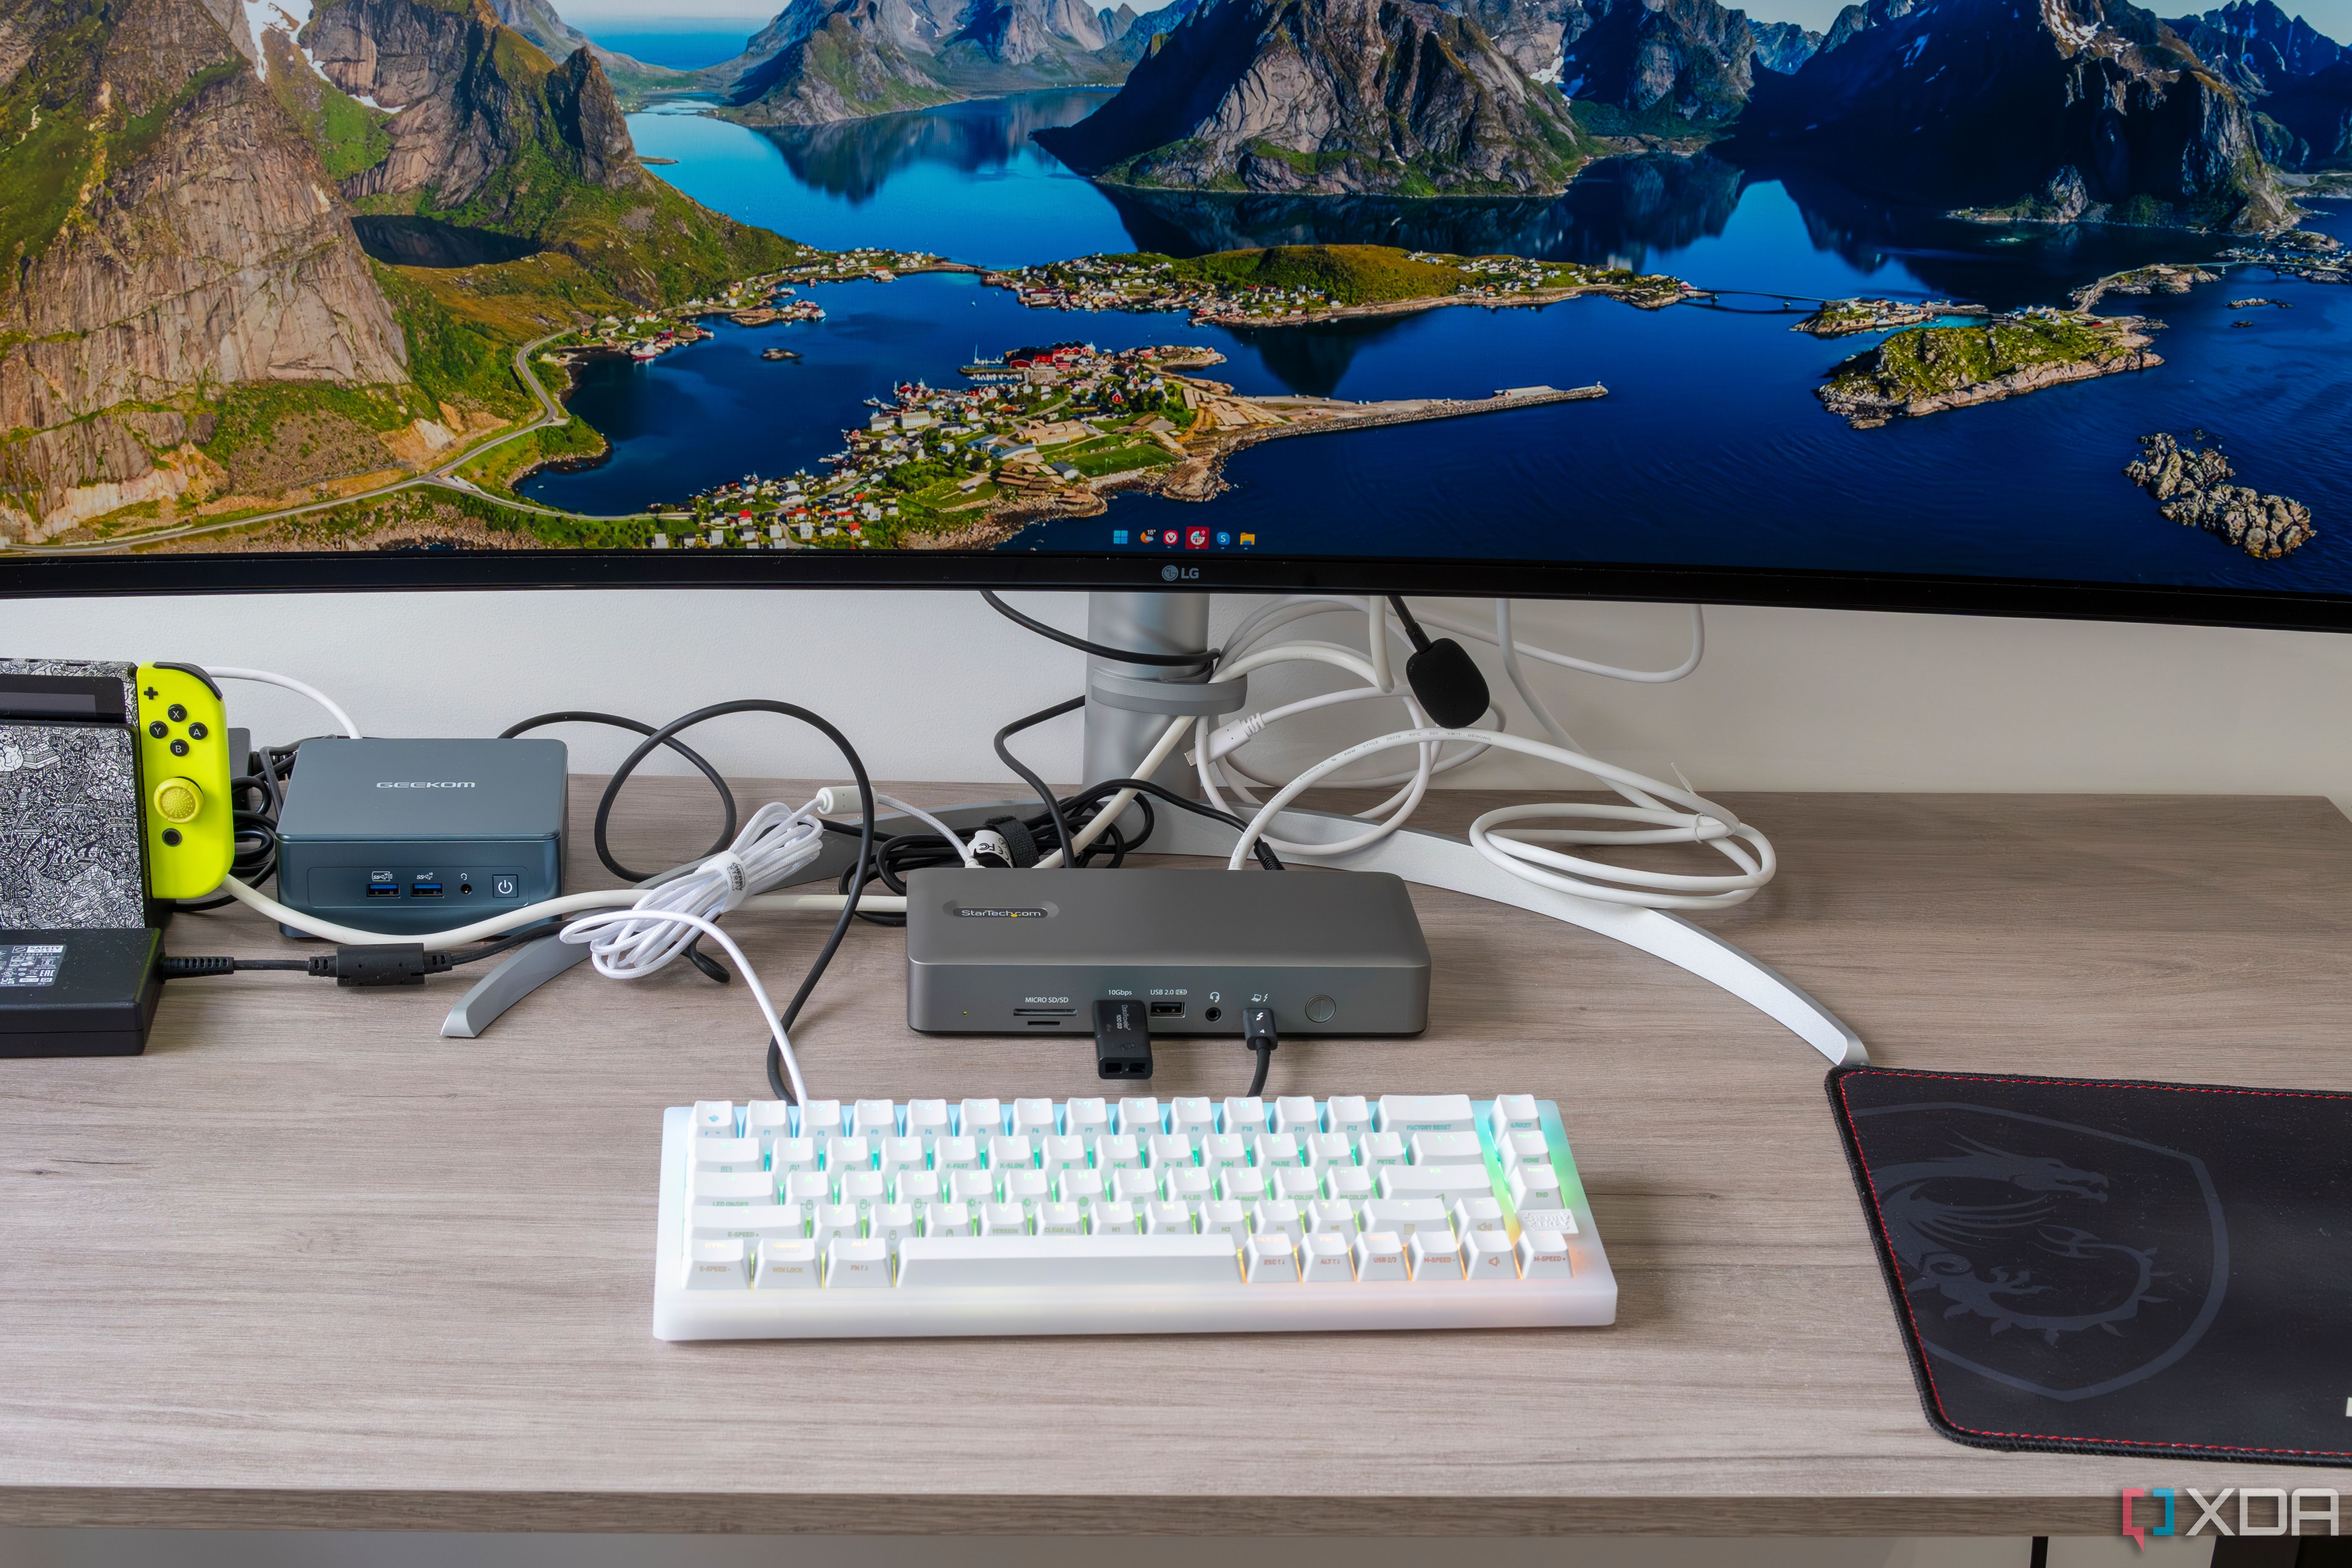 StarTech Thunderbolt 4 Multi-Display Docking Station review: You can't ask for more ports